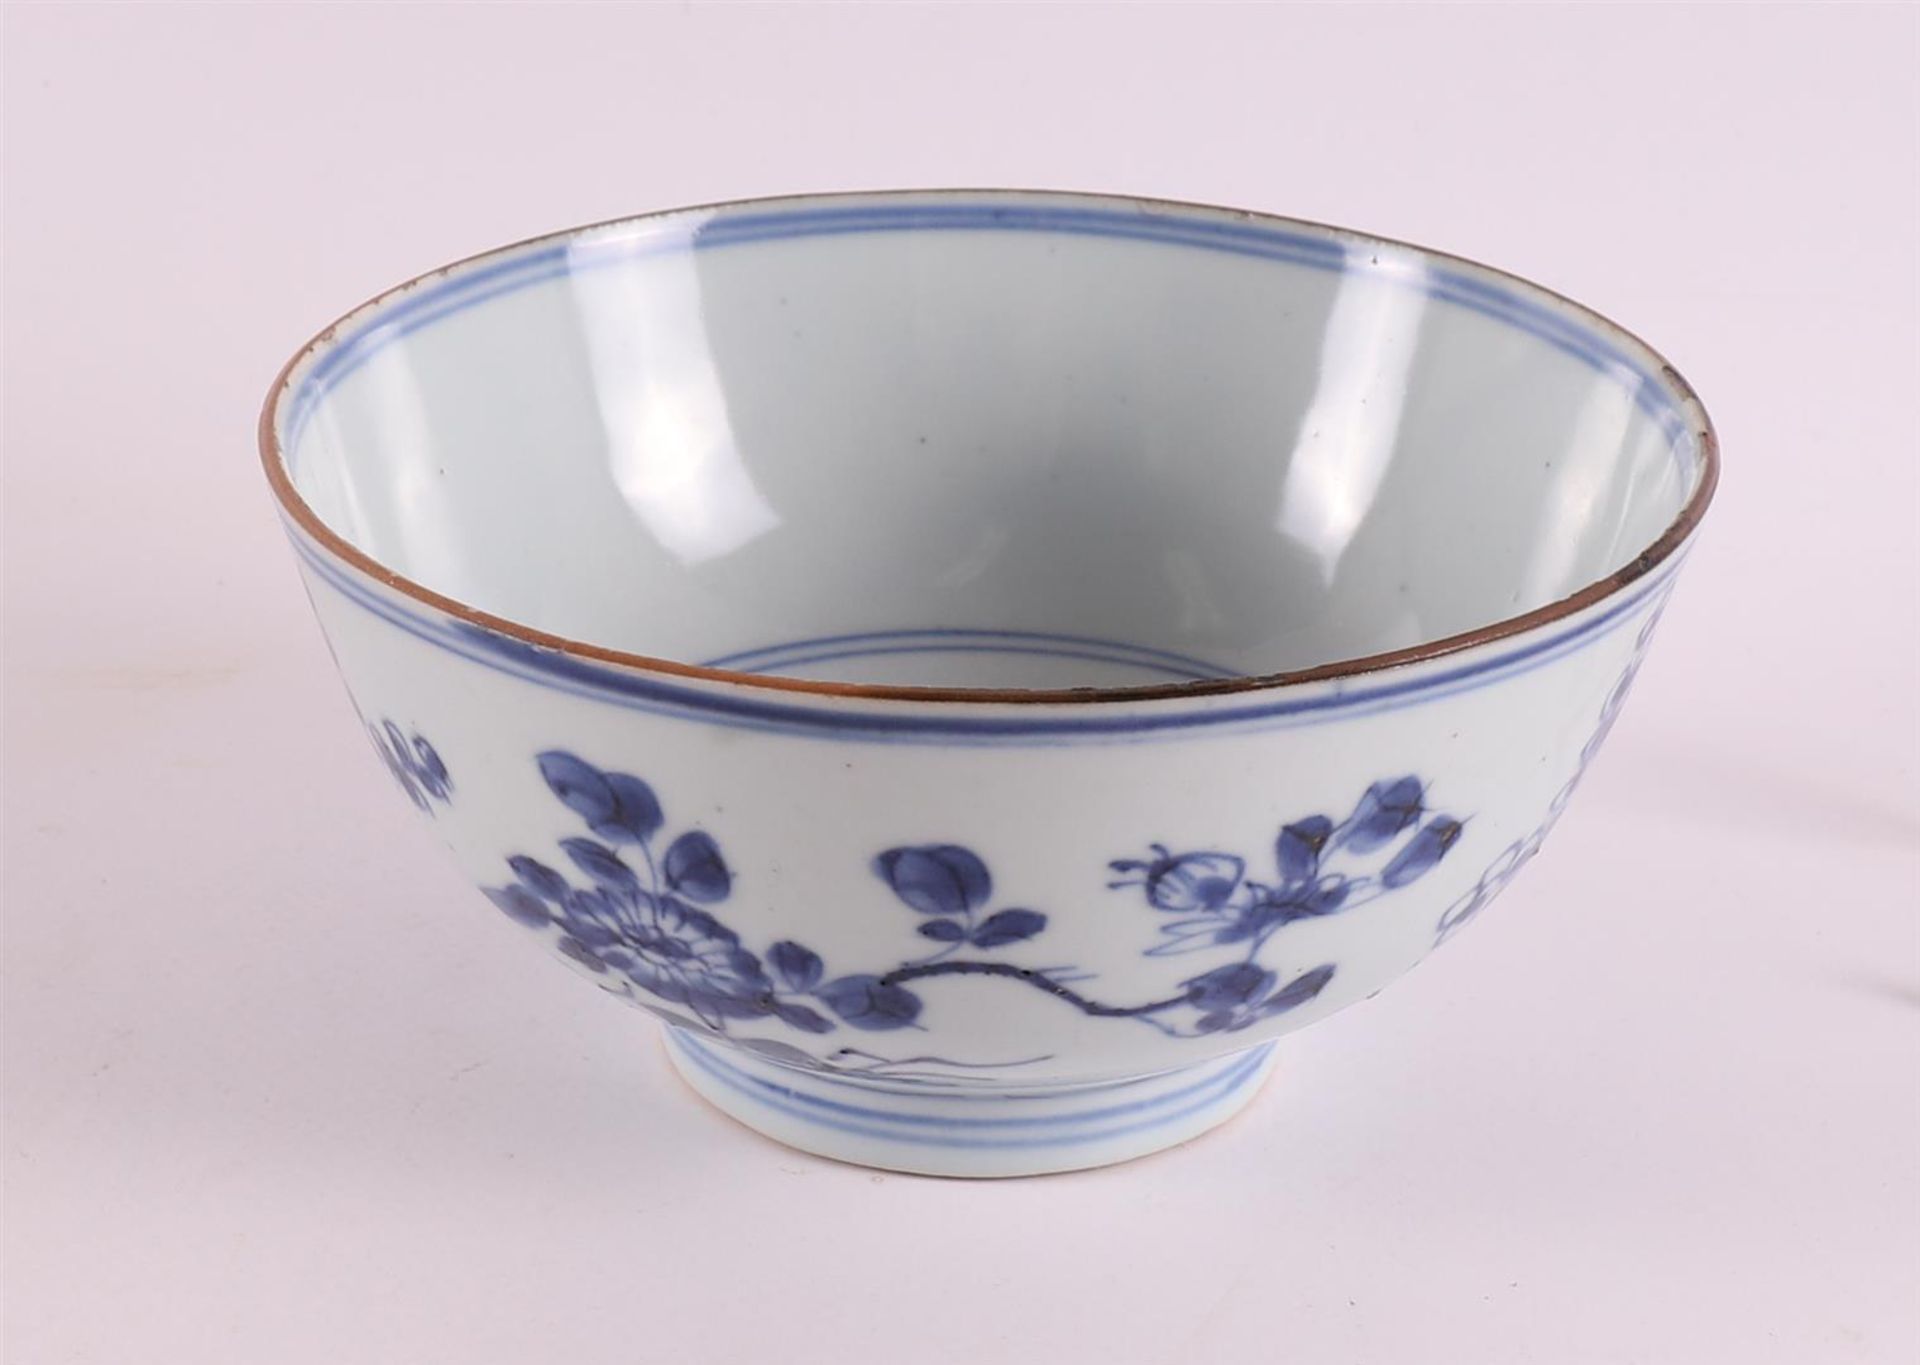 A blue/white porcelain bowl on a stand ring, China, Kangxi, around 1700. Blue underglaze floral